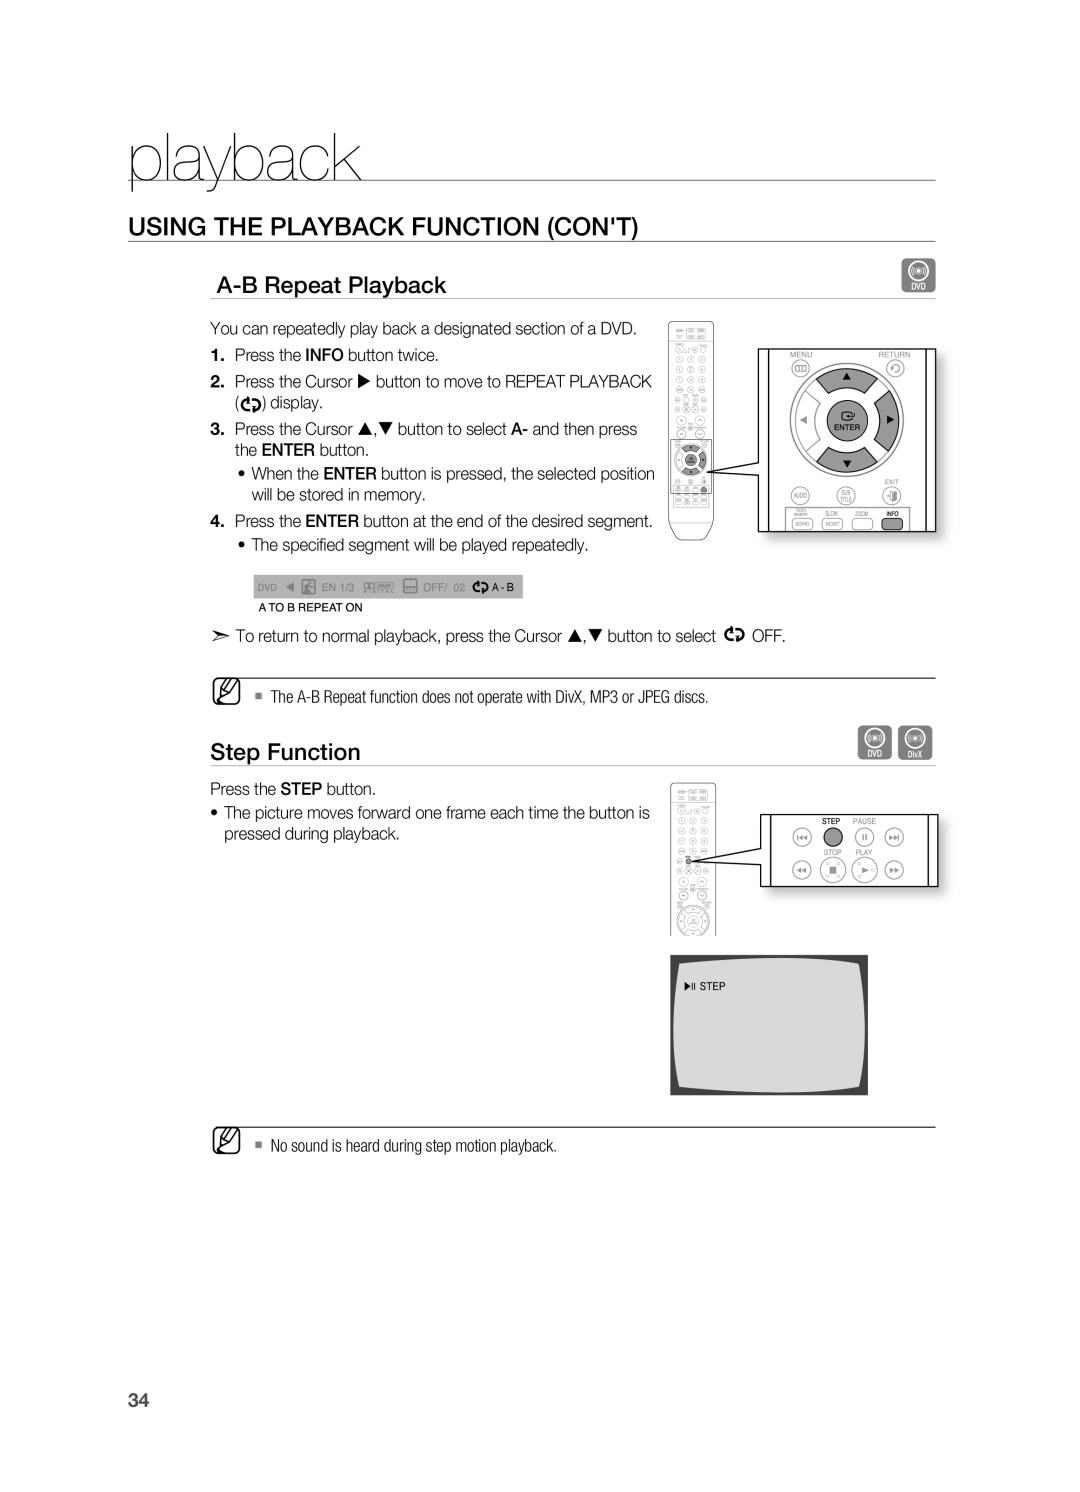 Sony HT-X810 user manual A-B repeat Playback, Step Function, playback, USING THE PlAYBACK FUNCTION CONT 